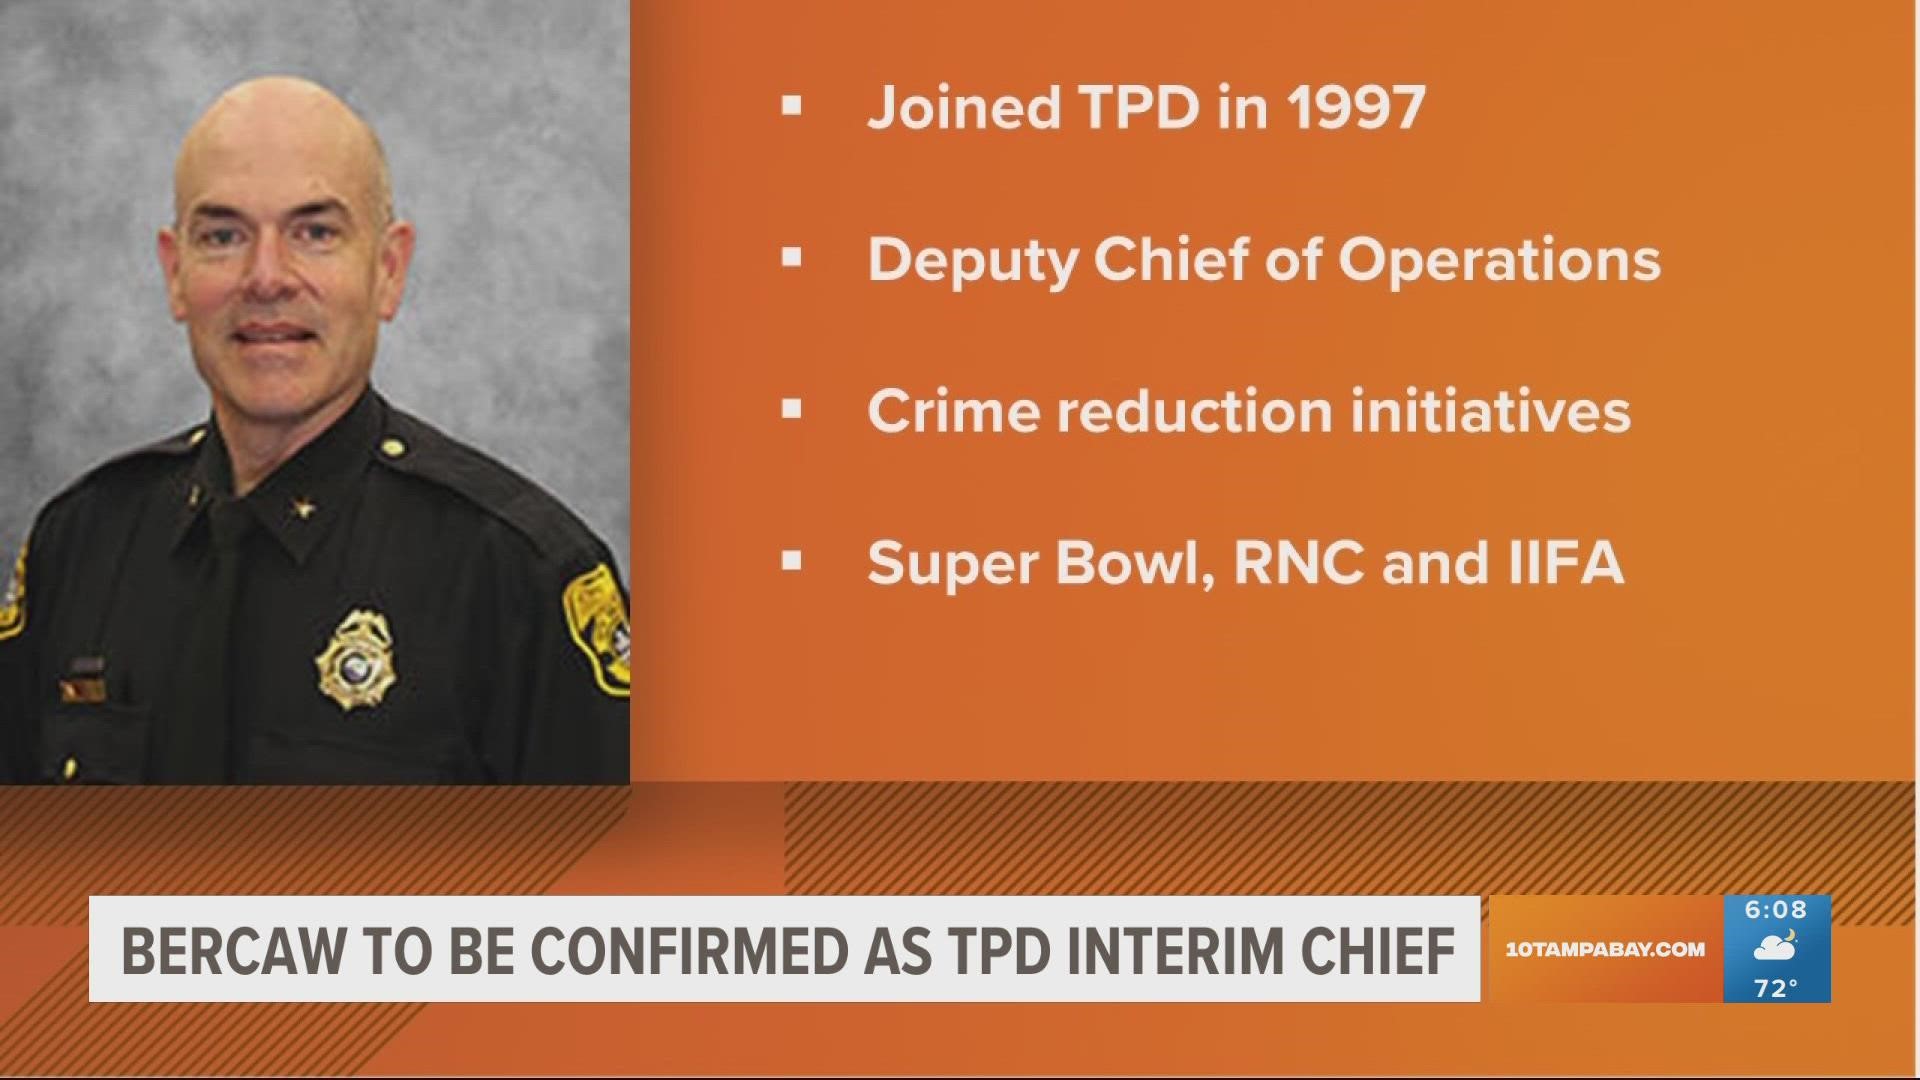 Lee Bercaw has been confirmed an Interim Chief of Police in Tampa following the resignation of former chief Mary O'Connor.